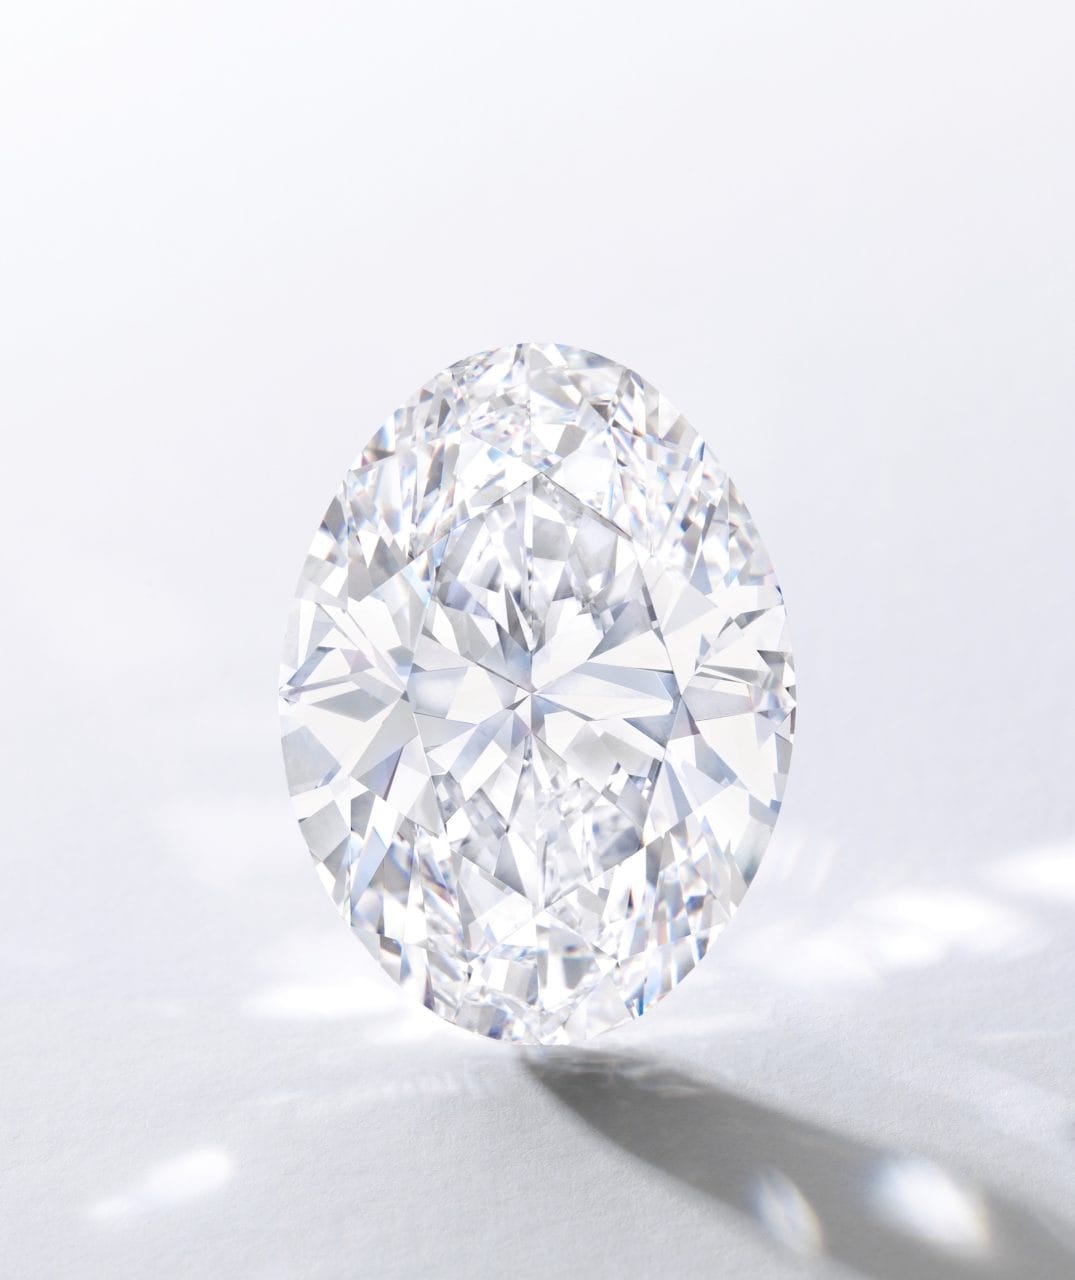 An 88.22 carat oval diamond, sold for 107,993,000 HKD in April 2018. Jewellery is another key department within auction houses, courtesy of Sotheby’s